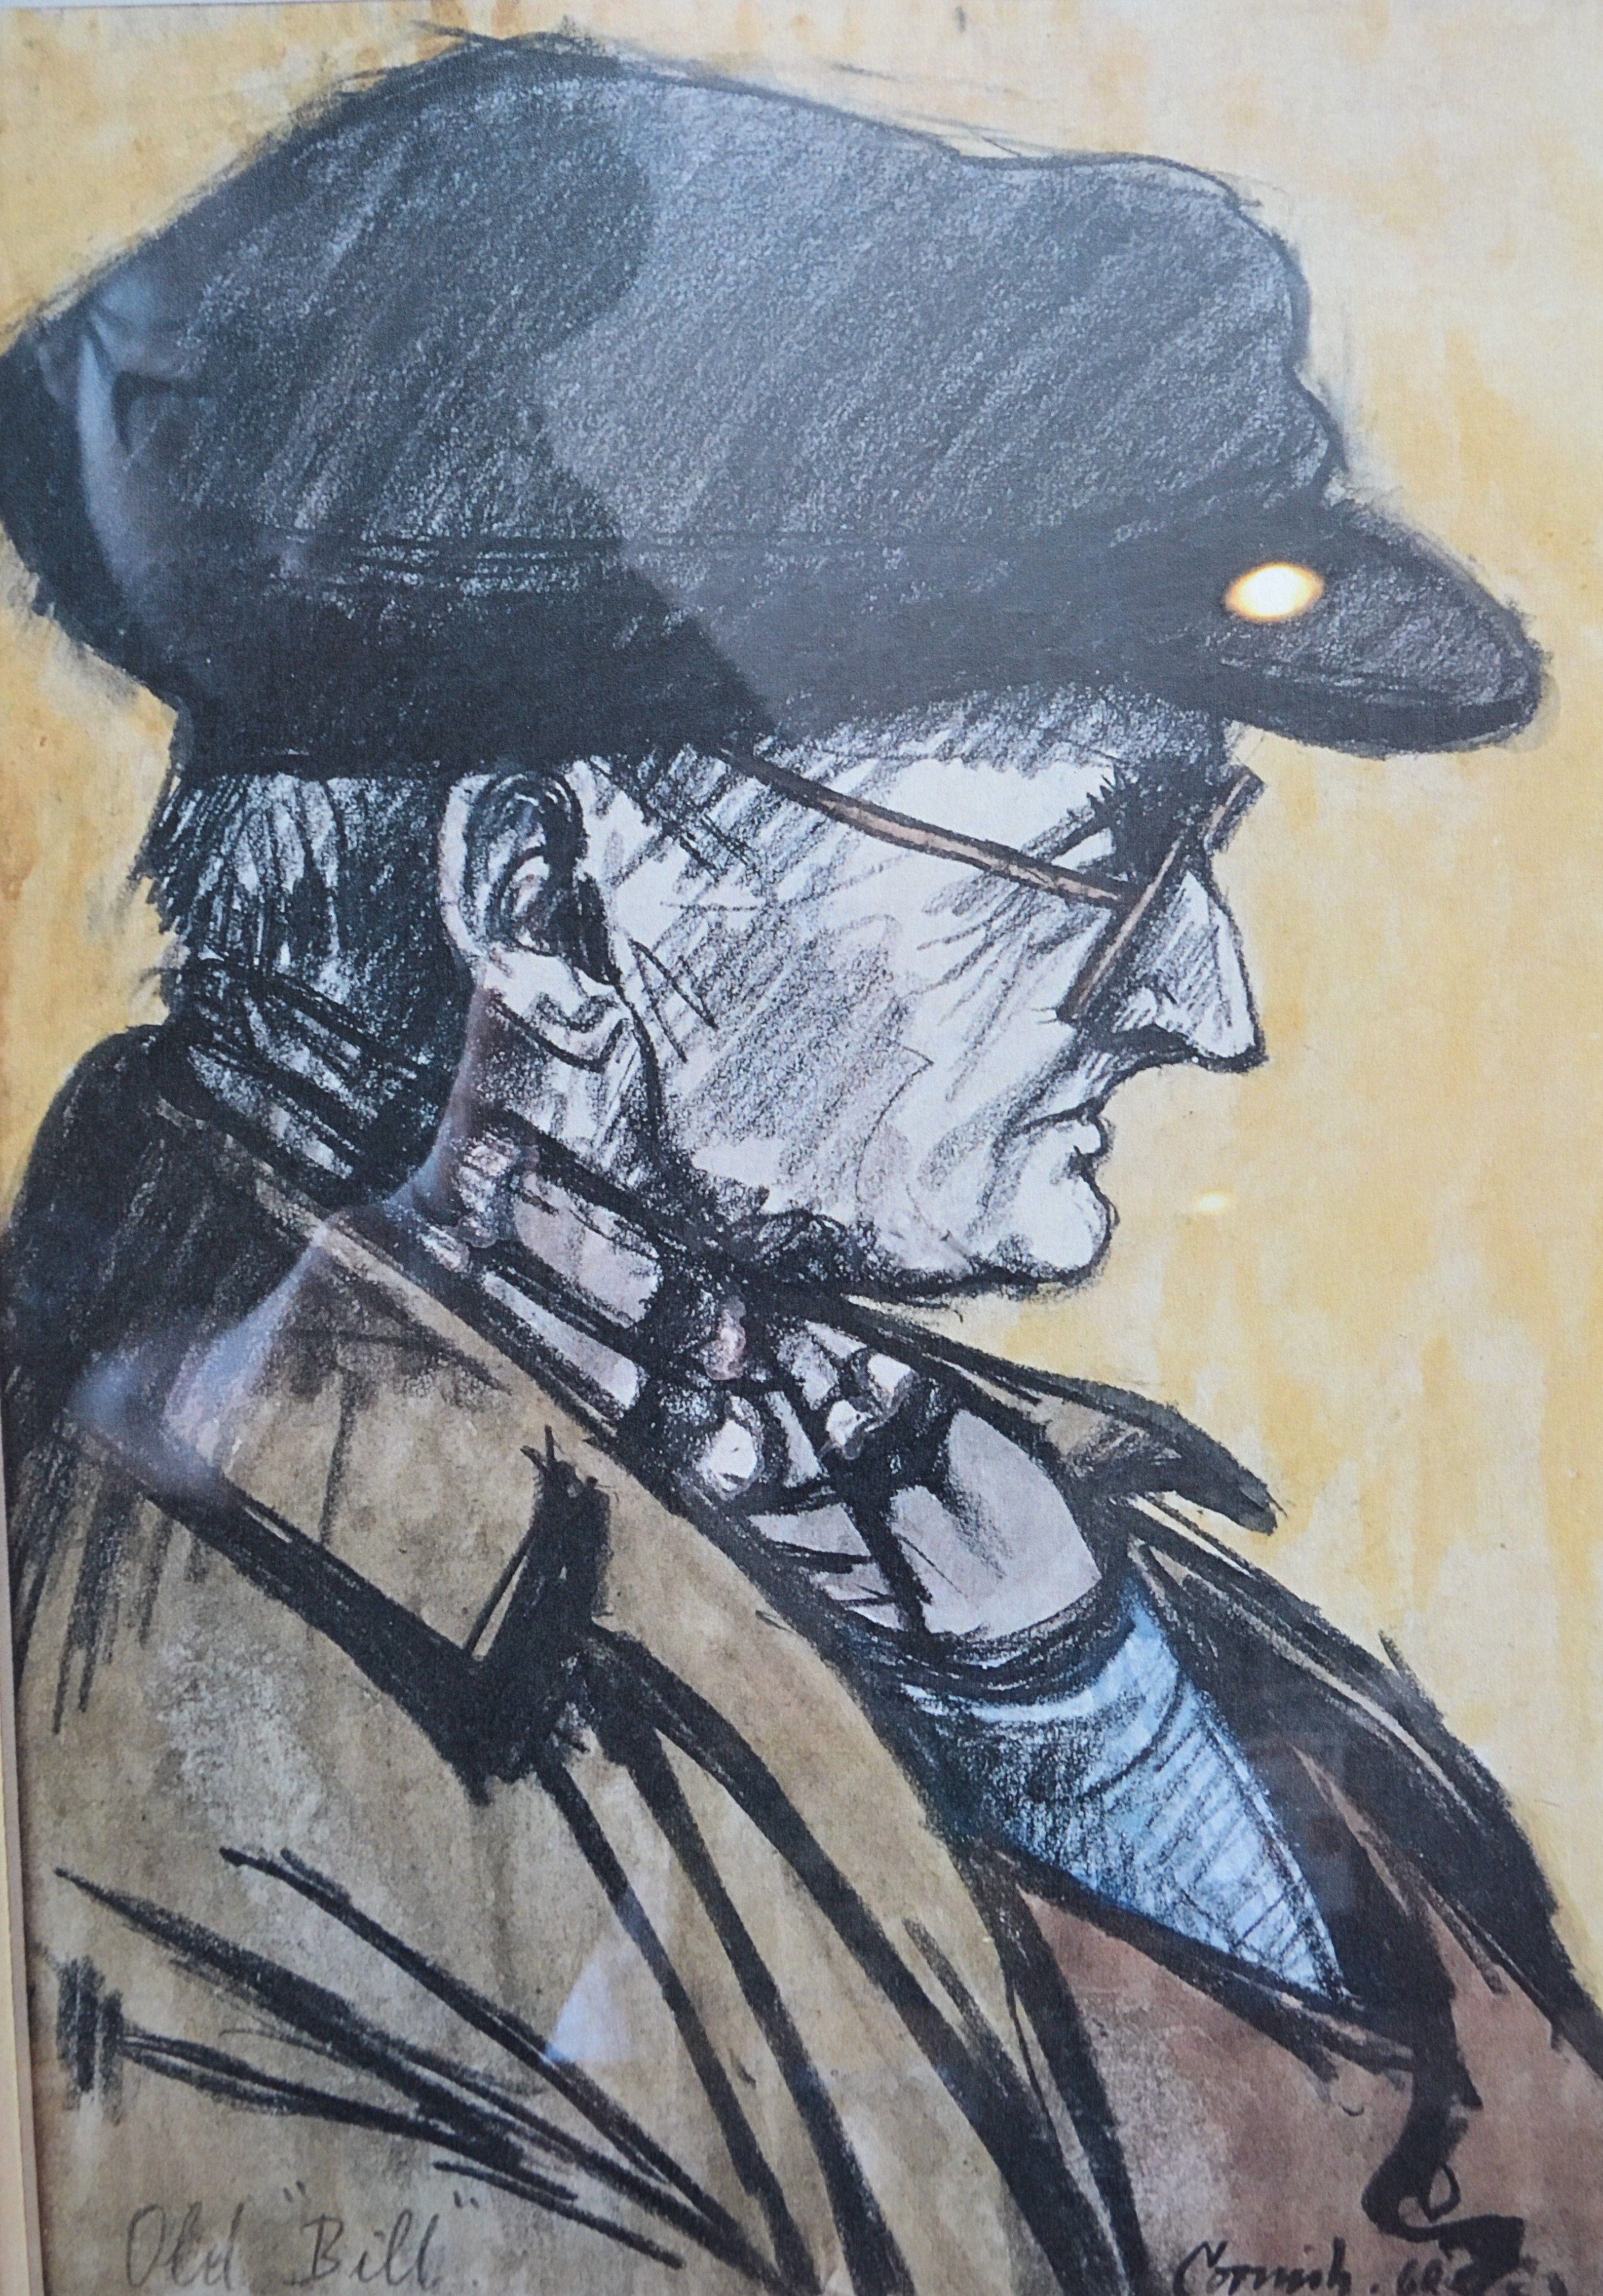 A sketch of a man’s face, front on, in black ink. He is wearing a flat cap.